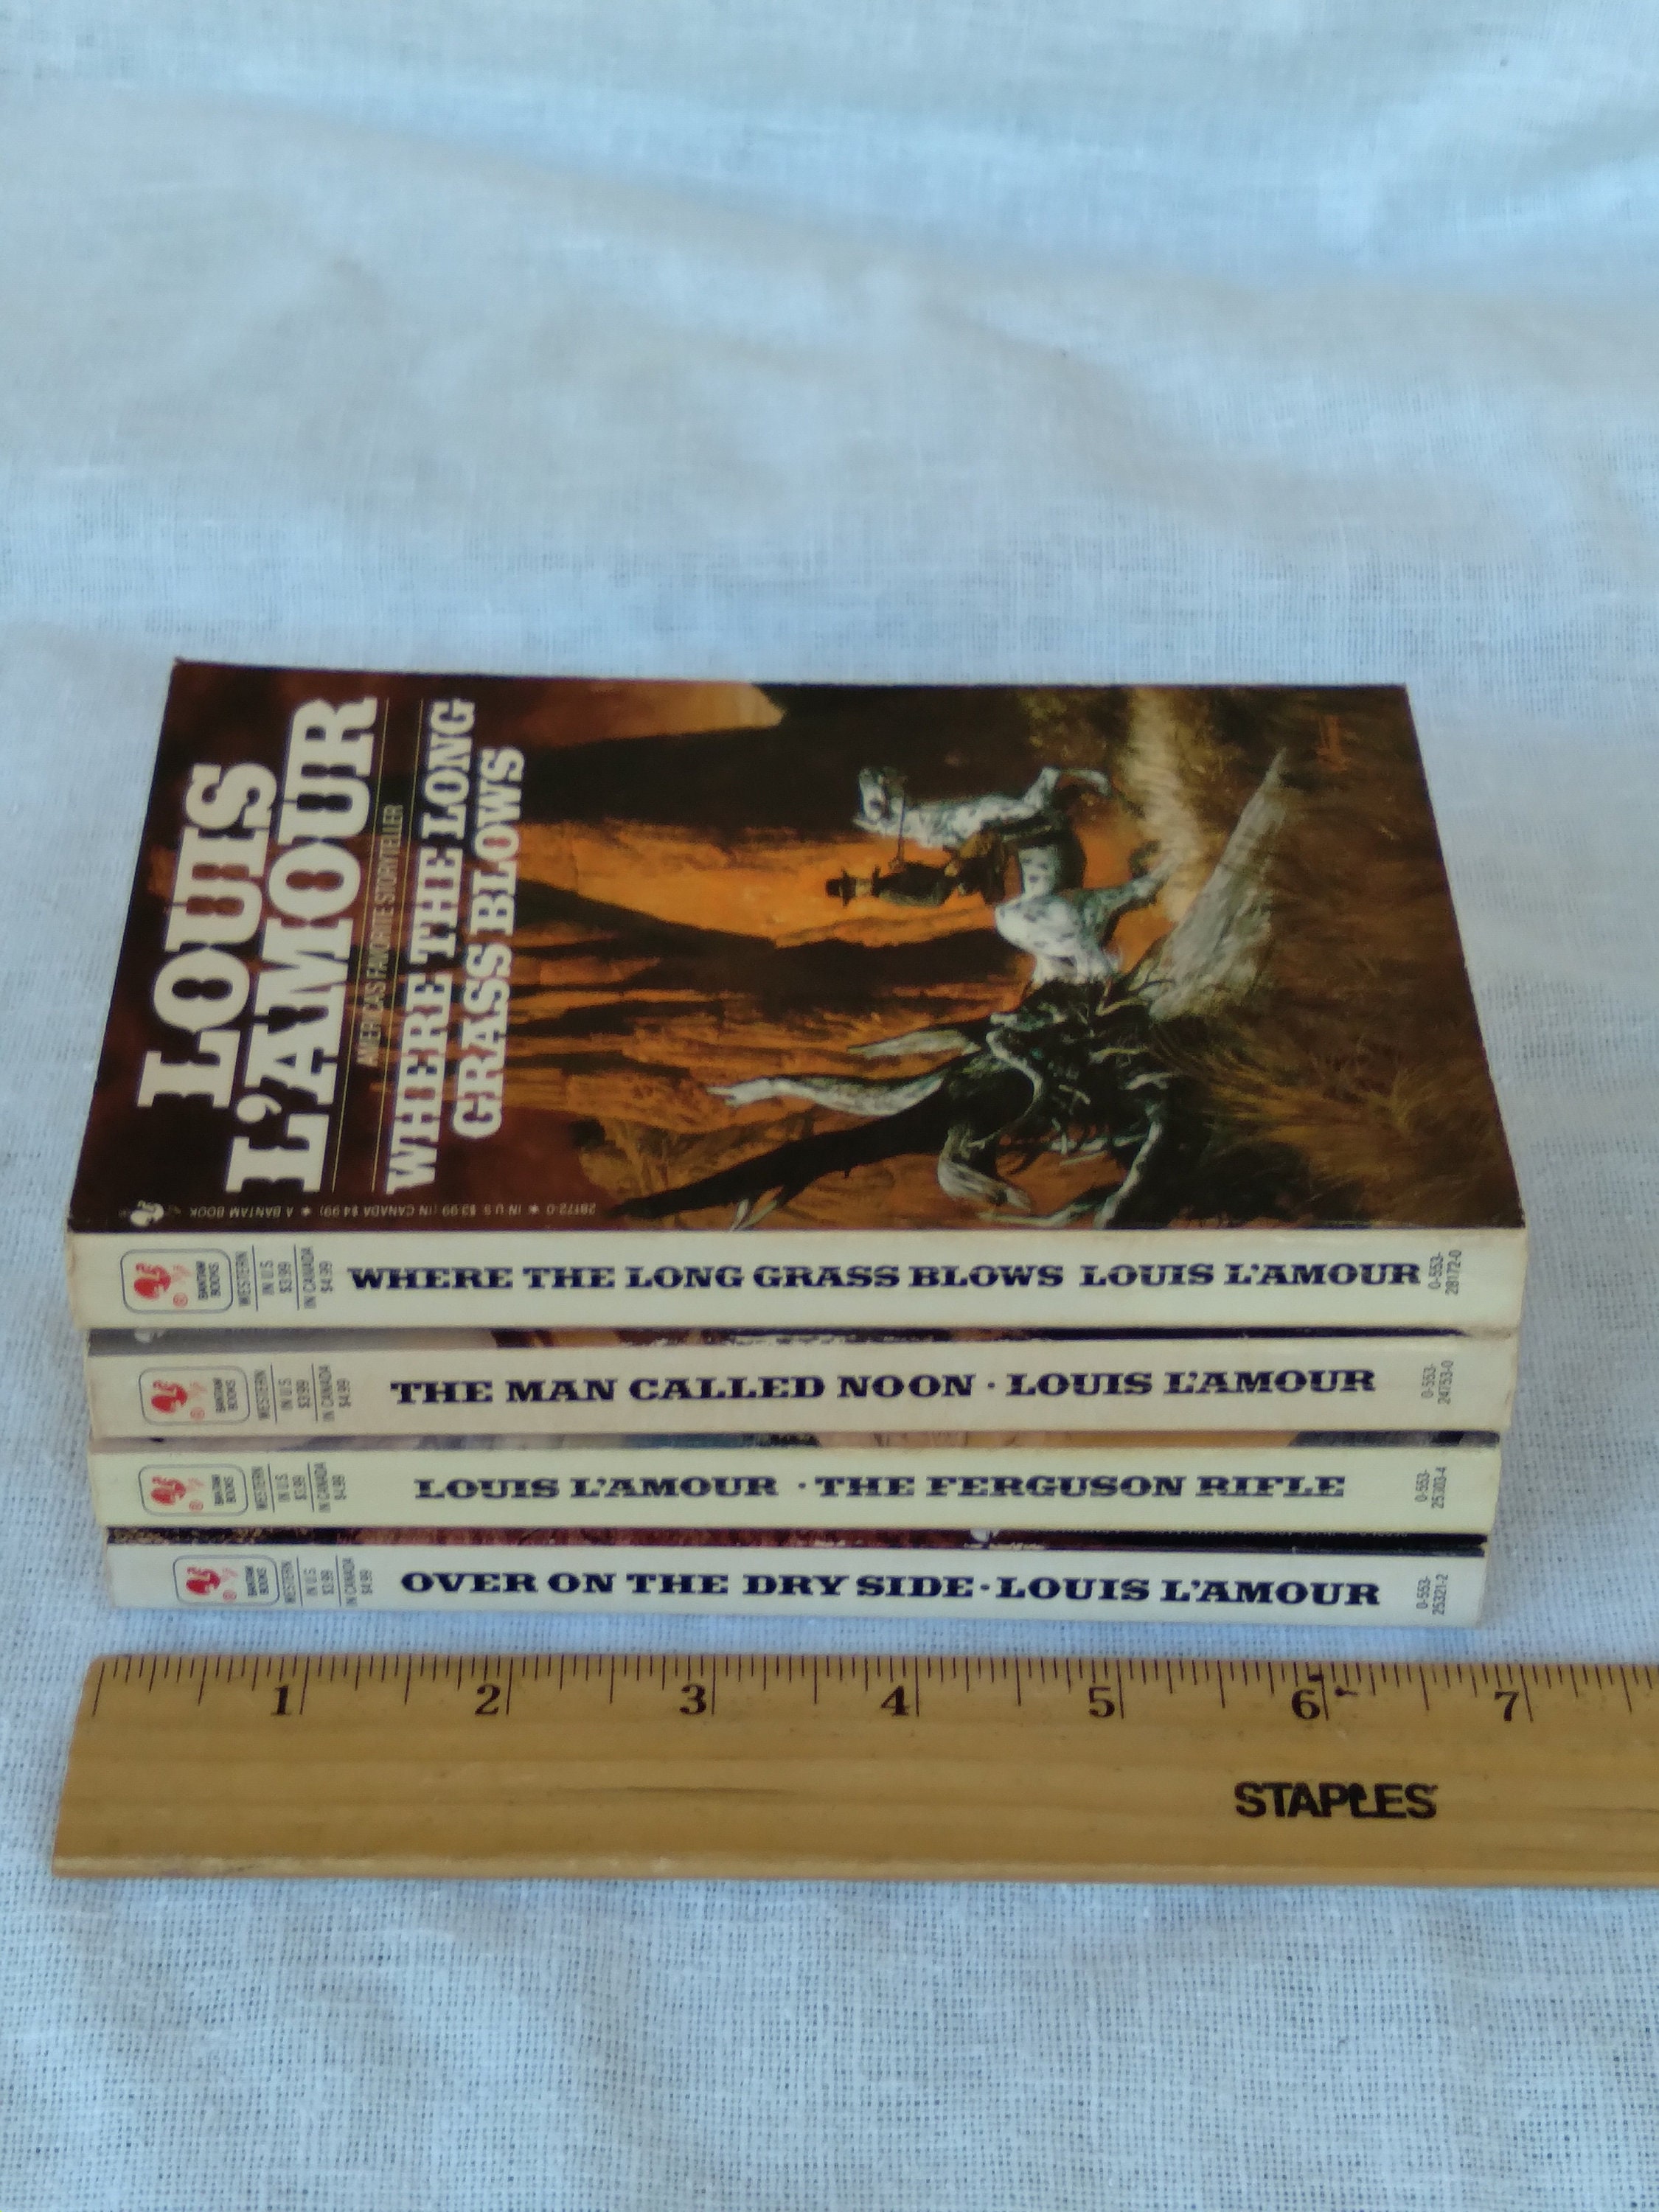 Long Ride Home Western Paperback Book by Louis L'Amour from Bantam  Books 1989